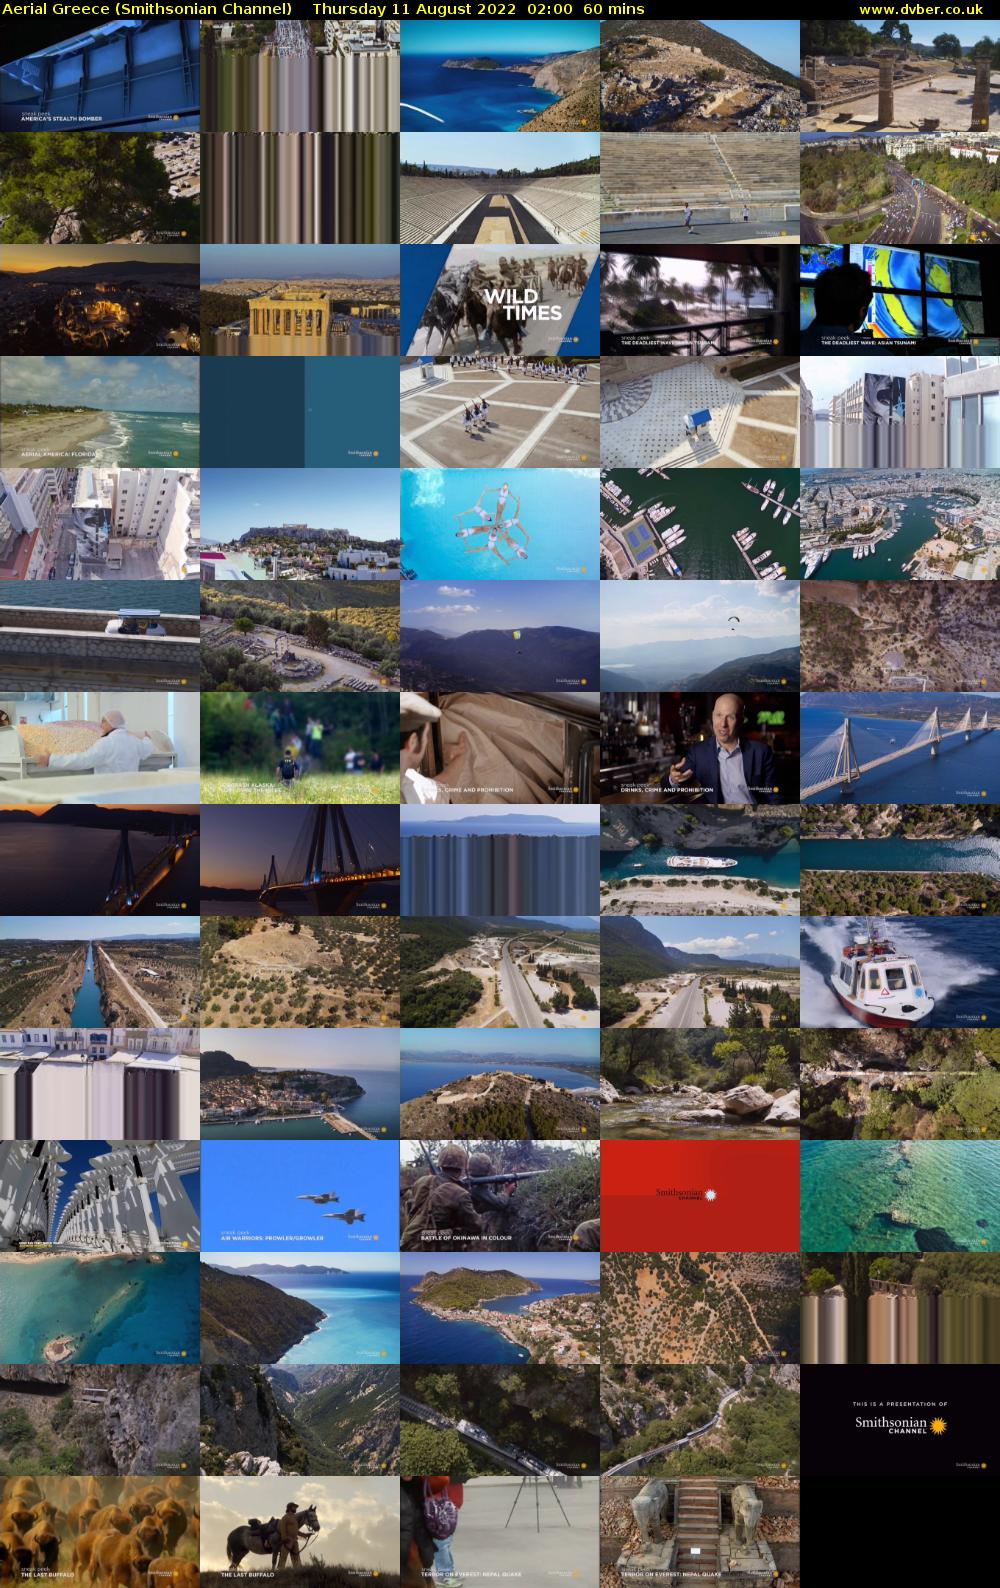 Aerial Greece (Smithsonian Channel) Thursday 11 August 2022 02:00 - 03:00